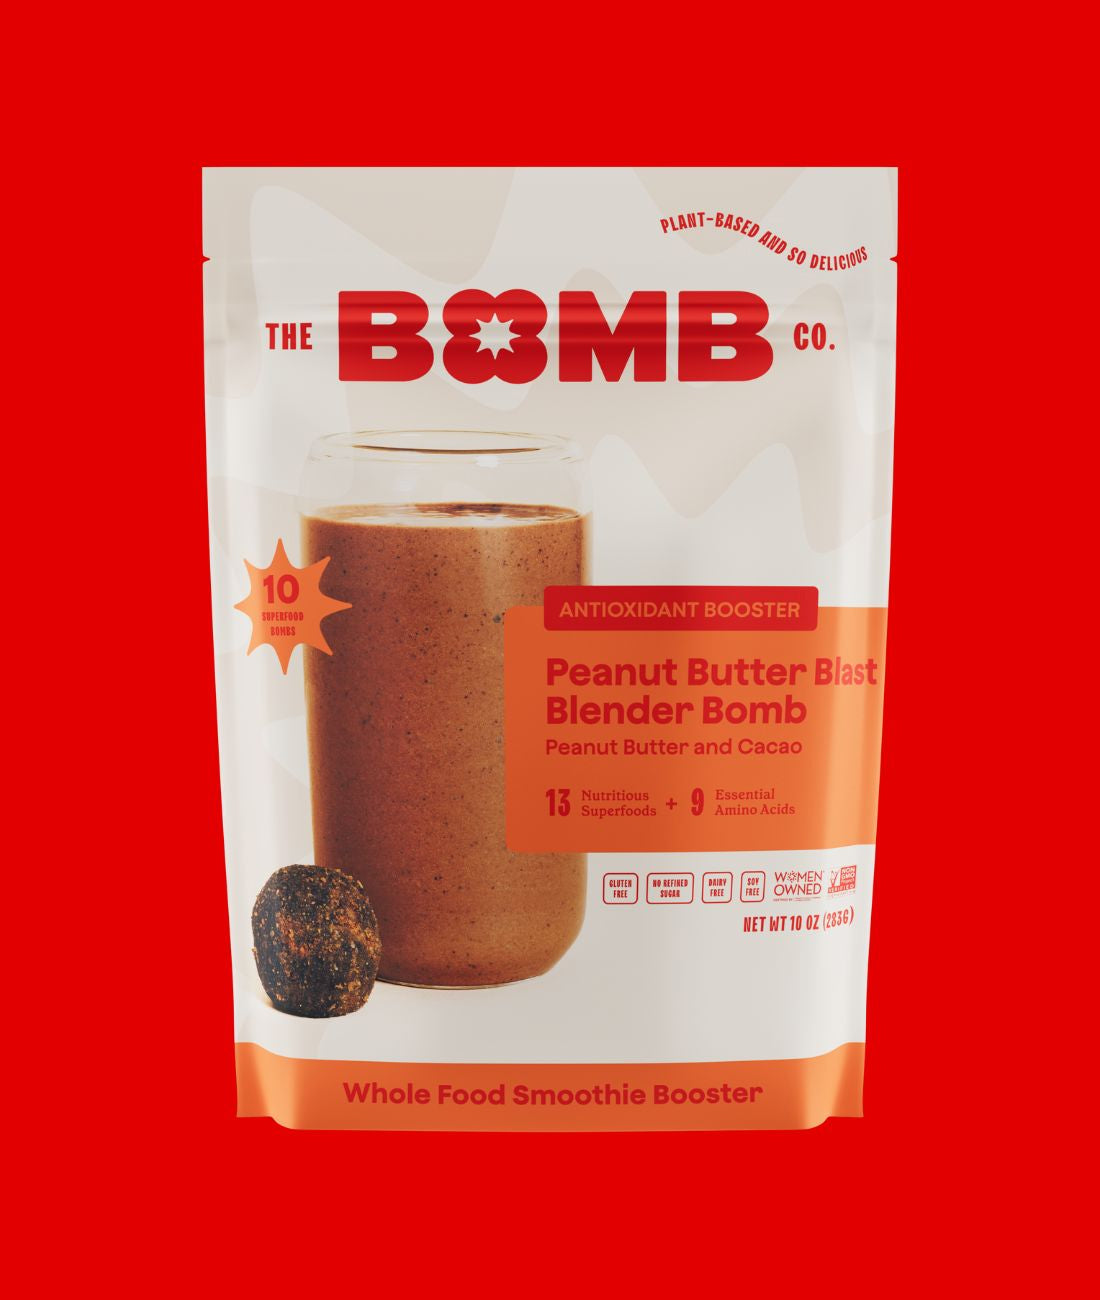 Blender Bombs Bomb Bar | Superfood Meal Replacement Bar | Plant-Based |  Filled with Berries, Nuts and Health Benefits | High in Fiber + Omega 3s 